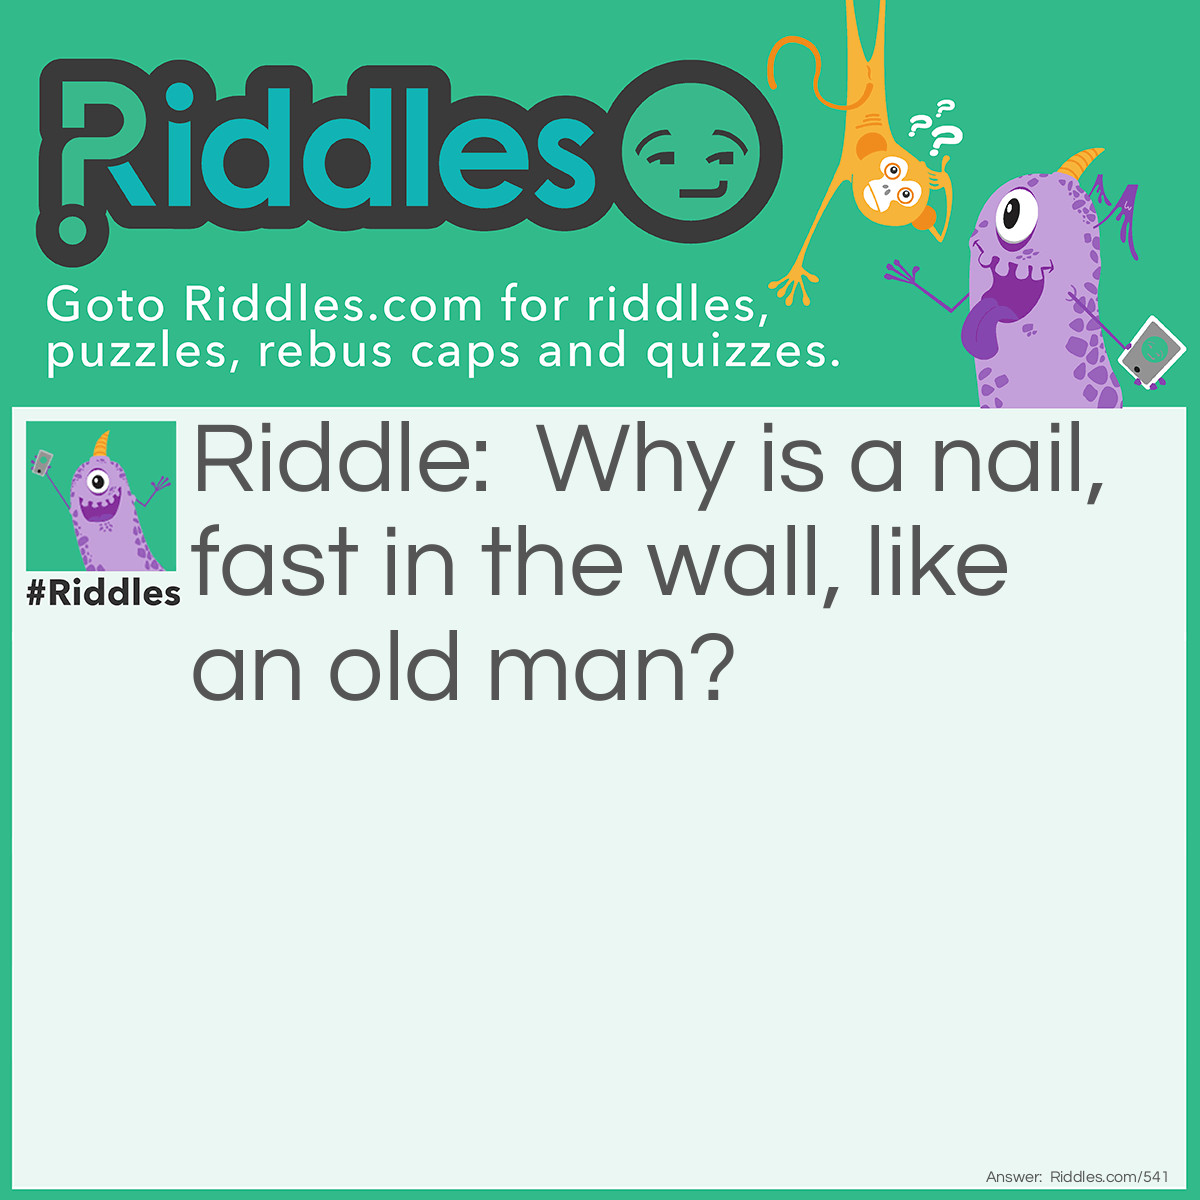 Riddle: Why is a nail, fast in the wall, like an old man? Answer: Because it is in firm (infirm).